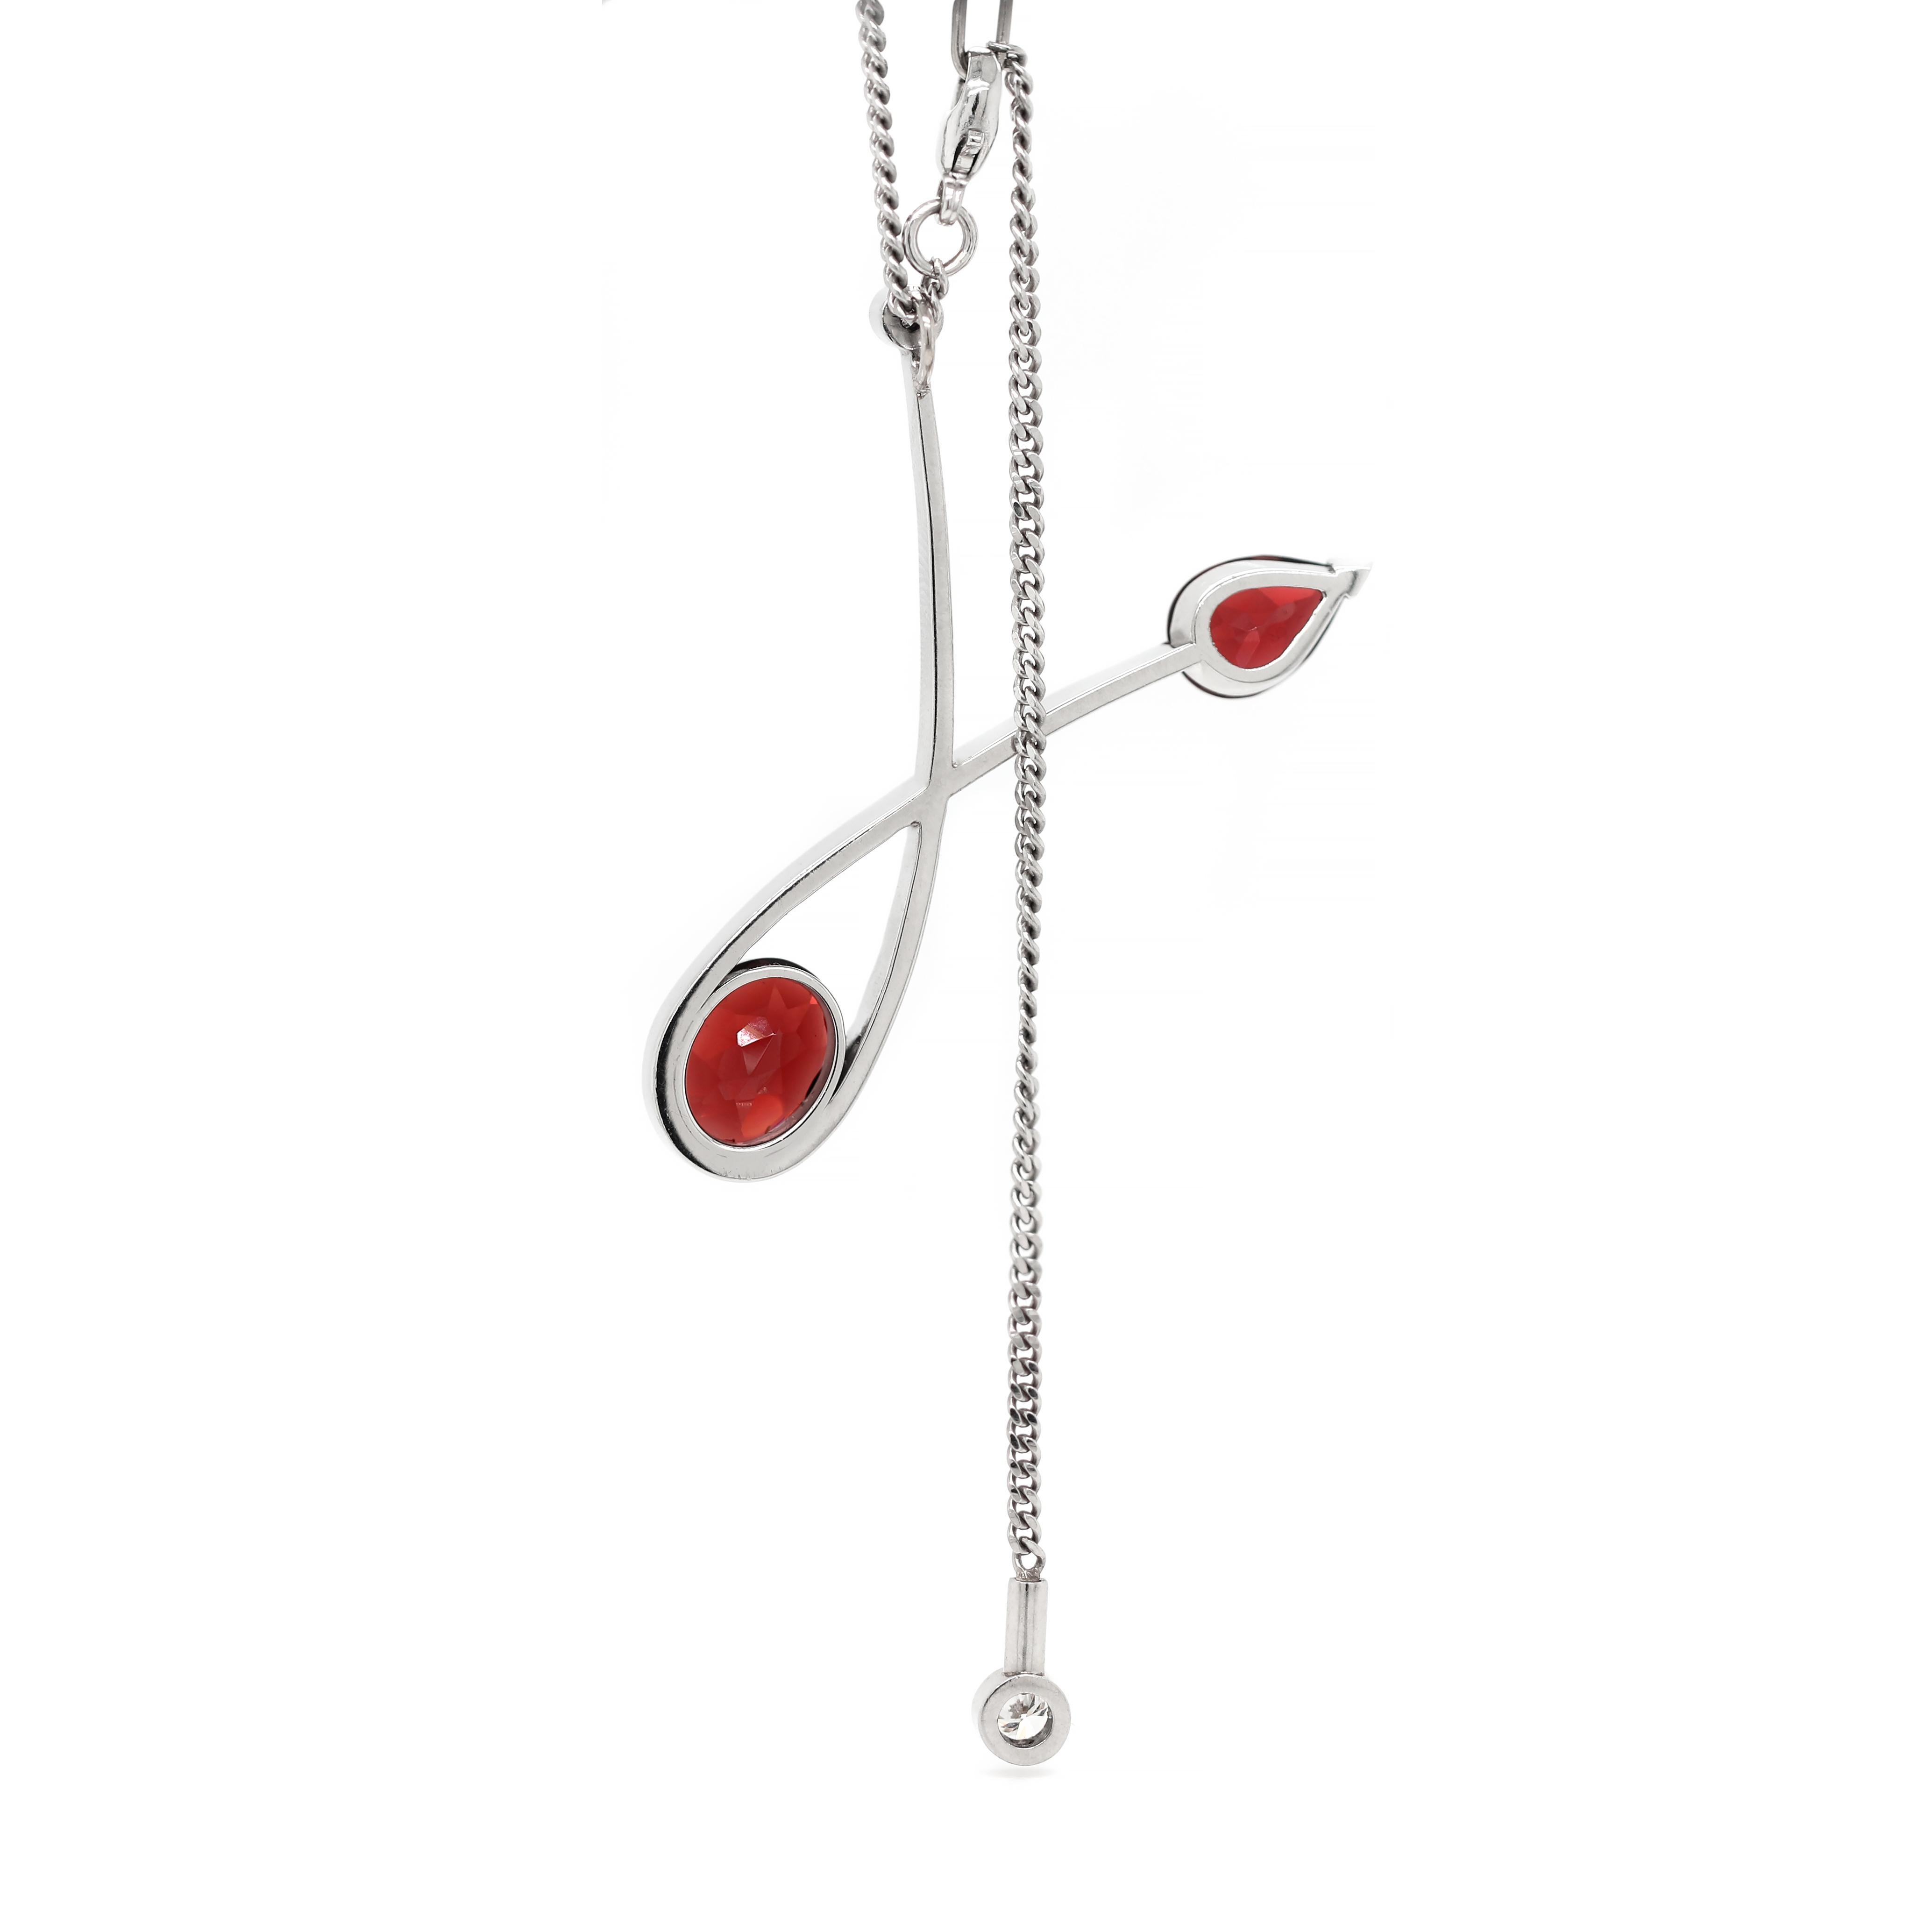 This lovely hand made necklace features an abstract loop platinum pendant, set with a pear shaped and an oval dark red garnet, coming to a combined approximate weight of 5.16 carats and a round brilliant cut diamond, weighting approximately 0.15ct.